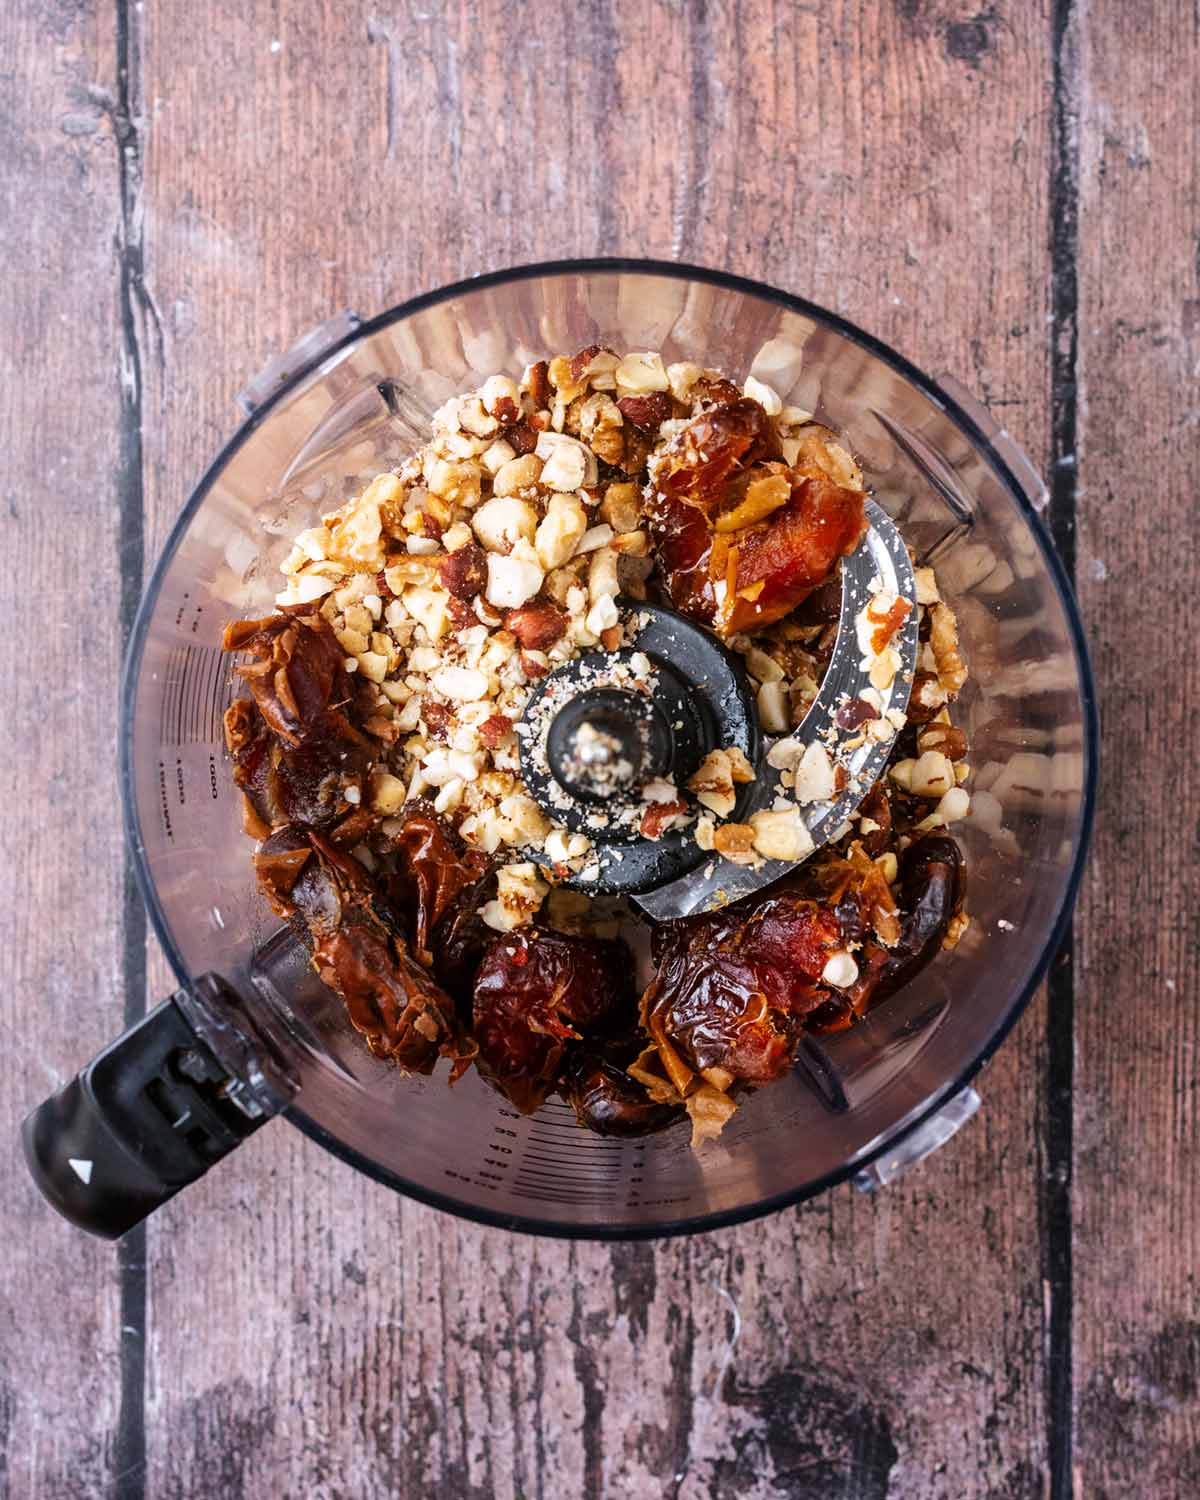 A food processor containing dates and crushed nuts.